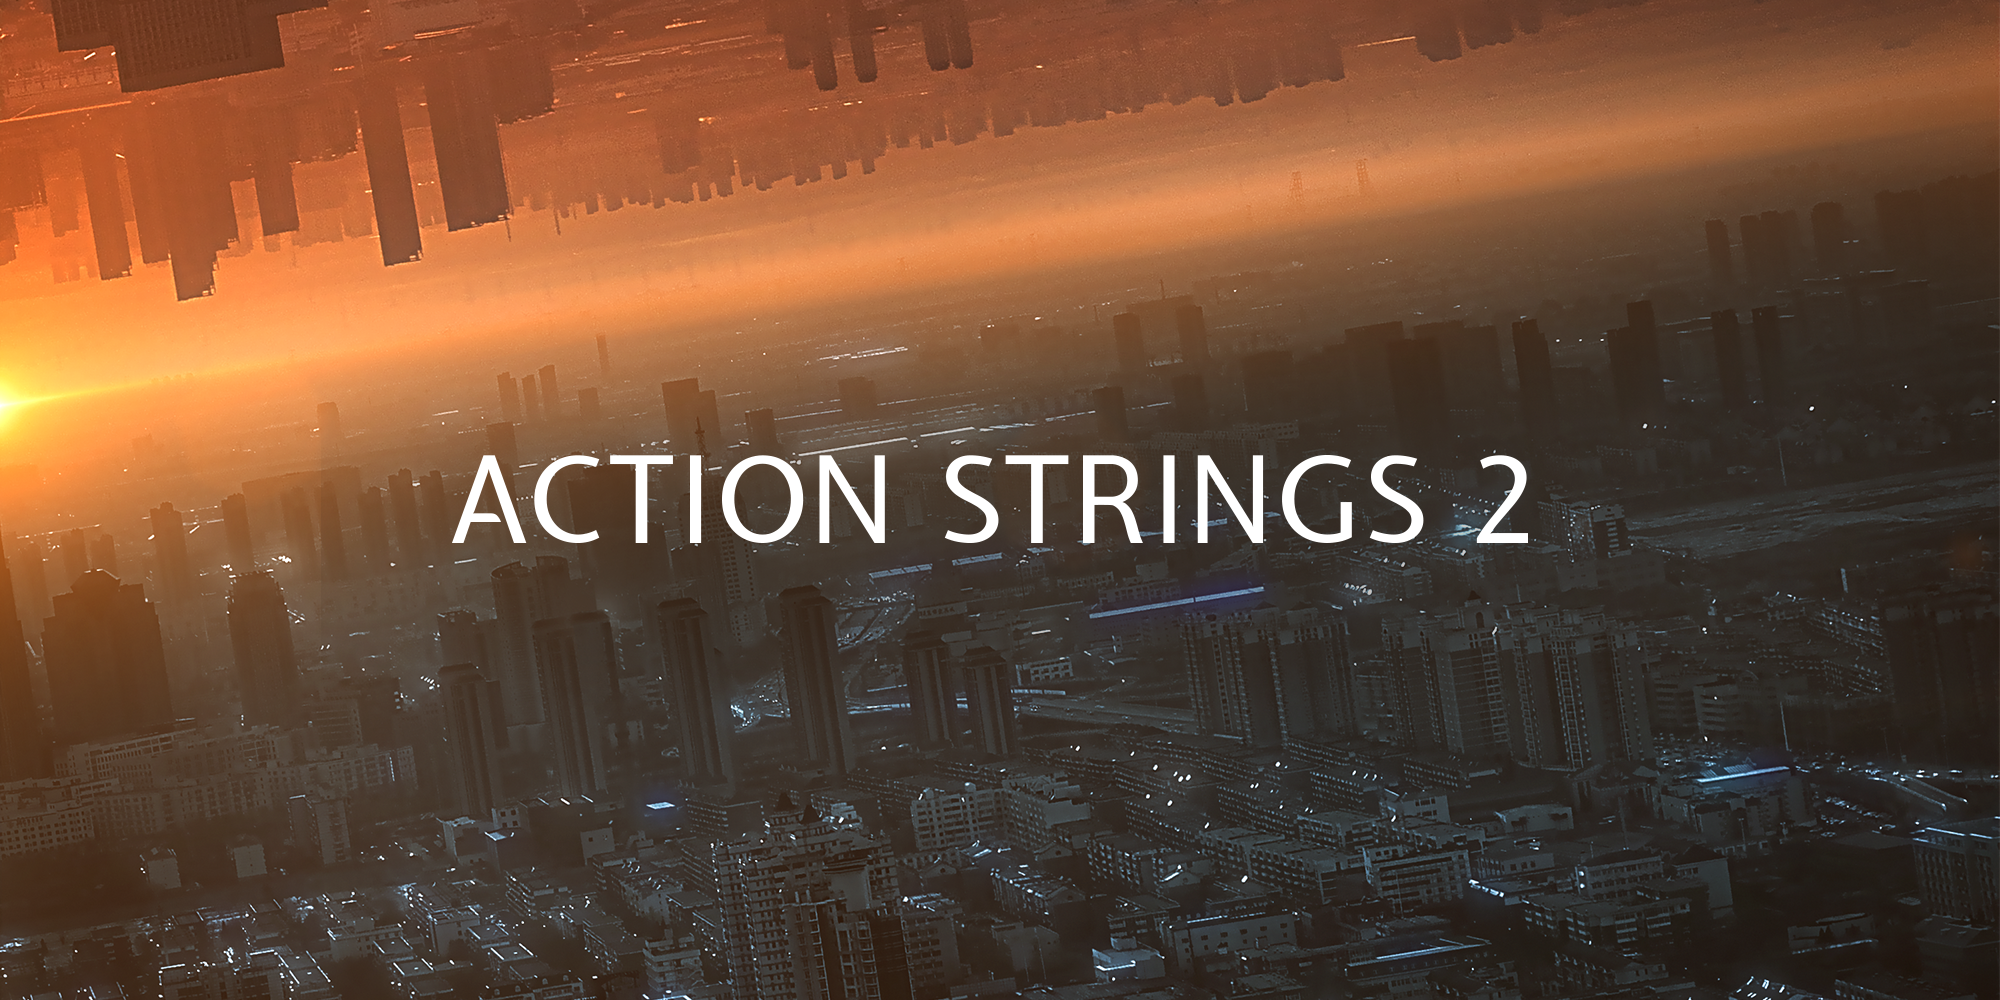 Action-Strings-2-manual-web-2000x1000.png